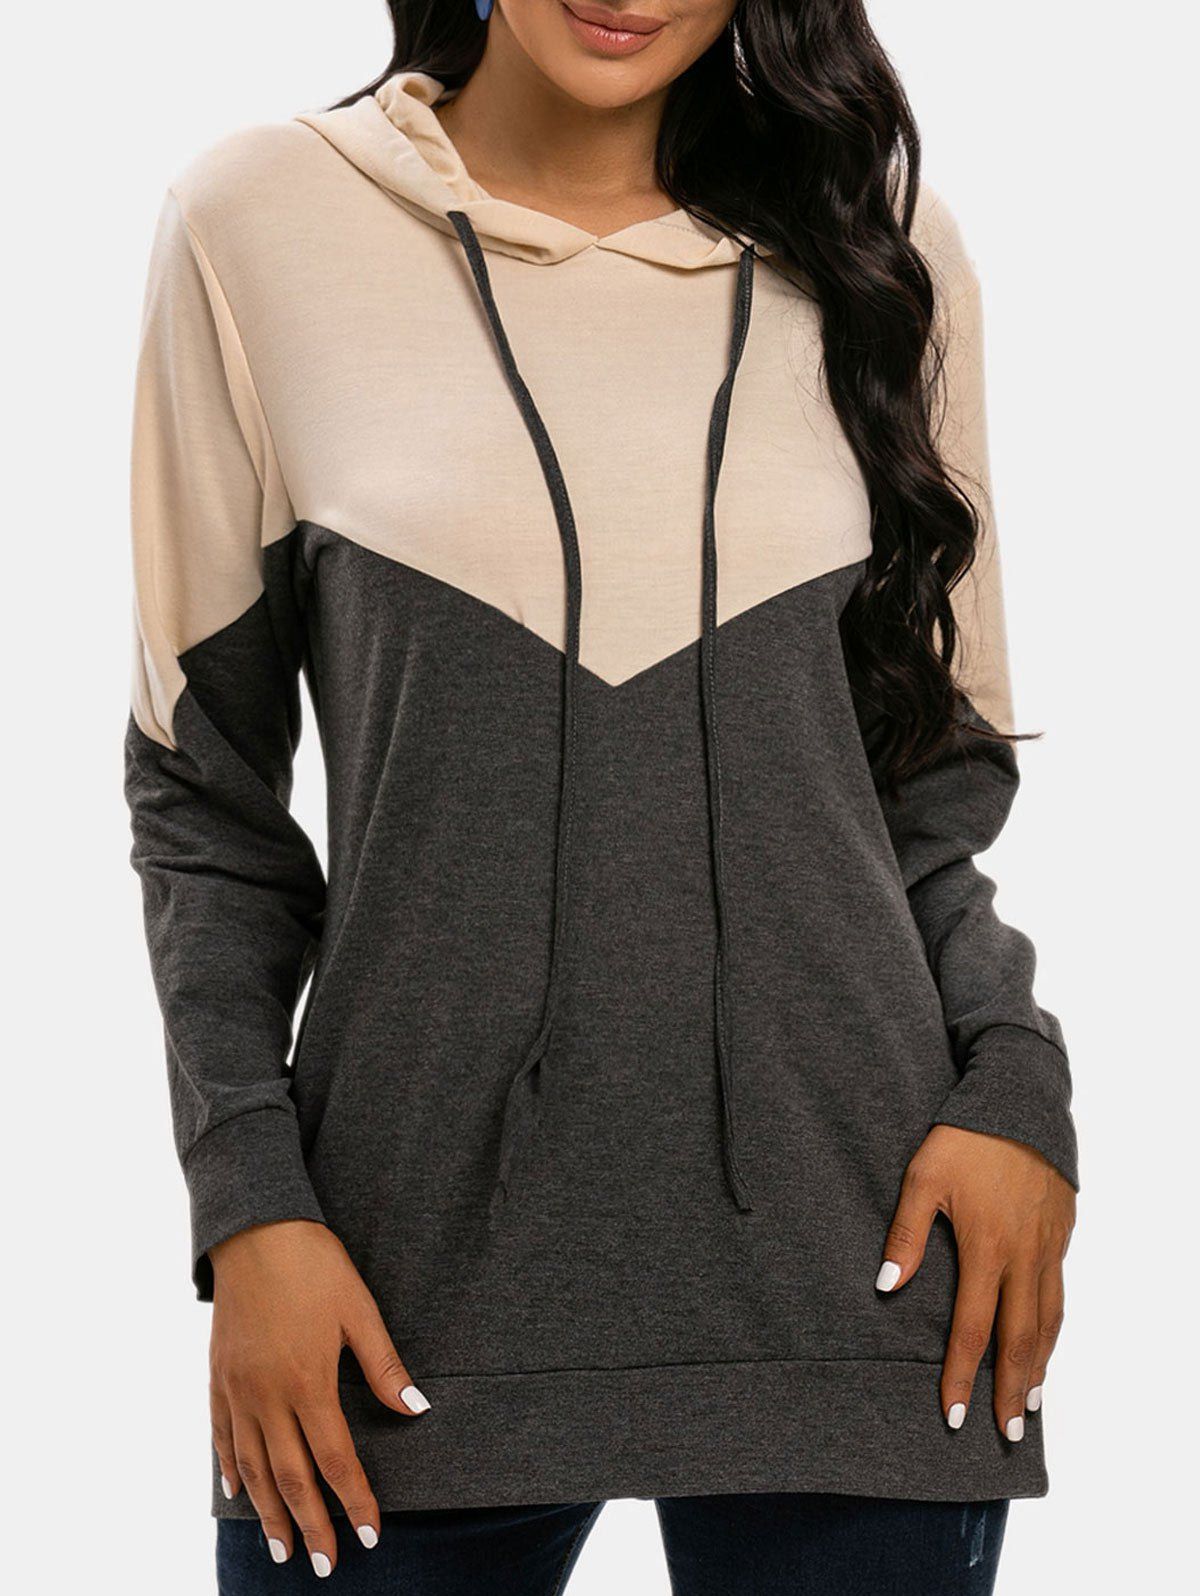 Two Tone Drawstring Pullover Hoodie - LIGHT COFFEE S